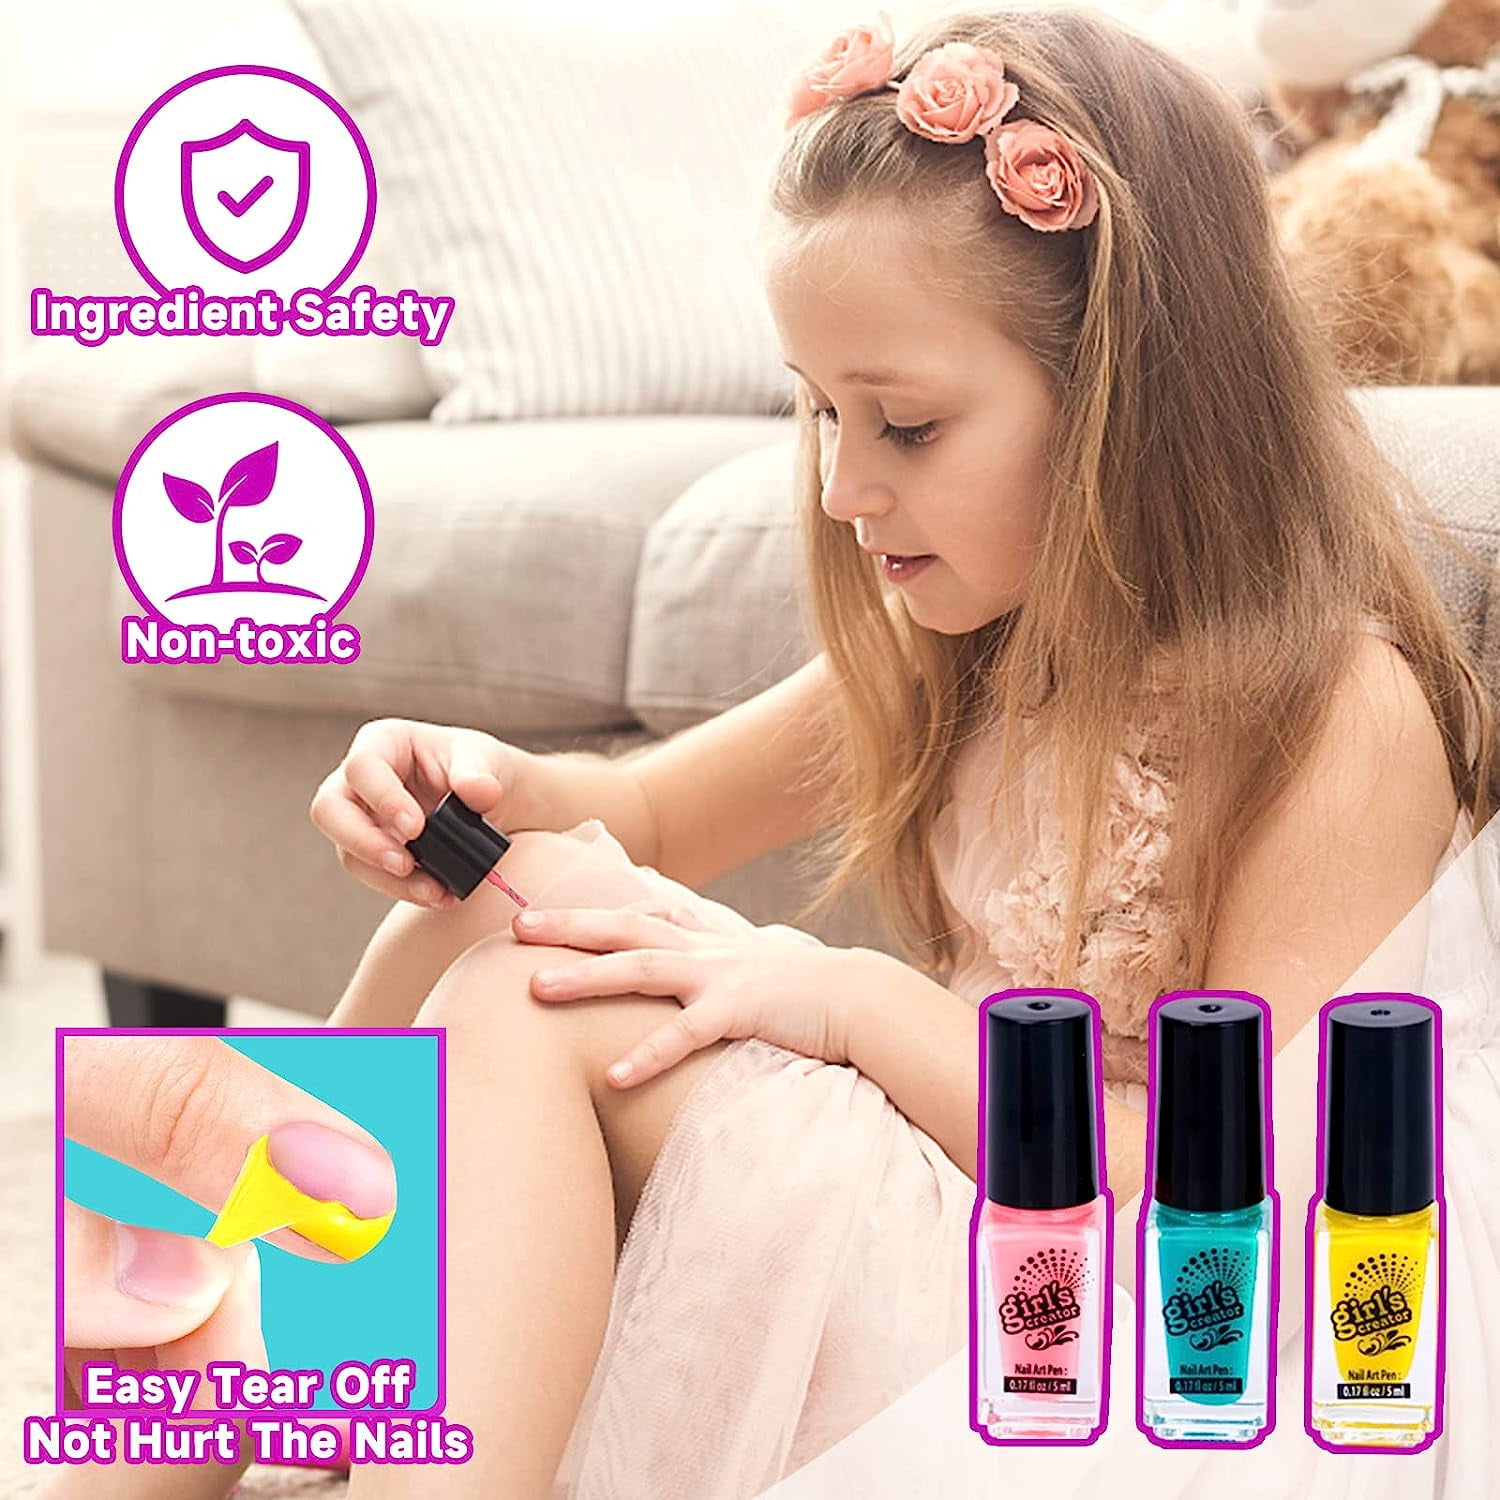 Nail Polish Set Toys For 8-12 Girls Gifts For 7 8 9 10 11 Year Old  Girls,kids Toys For Girls 10-12 Years Old Birthday Gift Ideas Nail Art Kit  For Kid